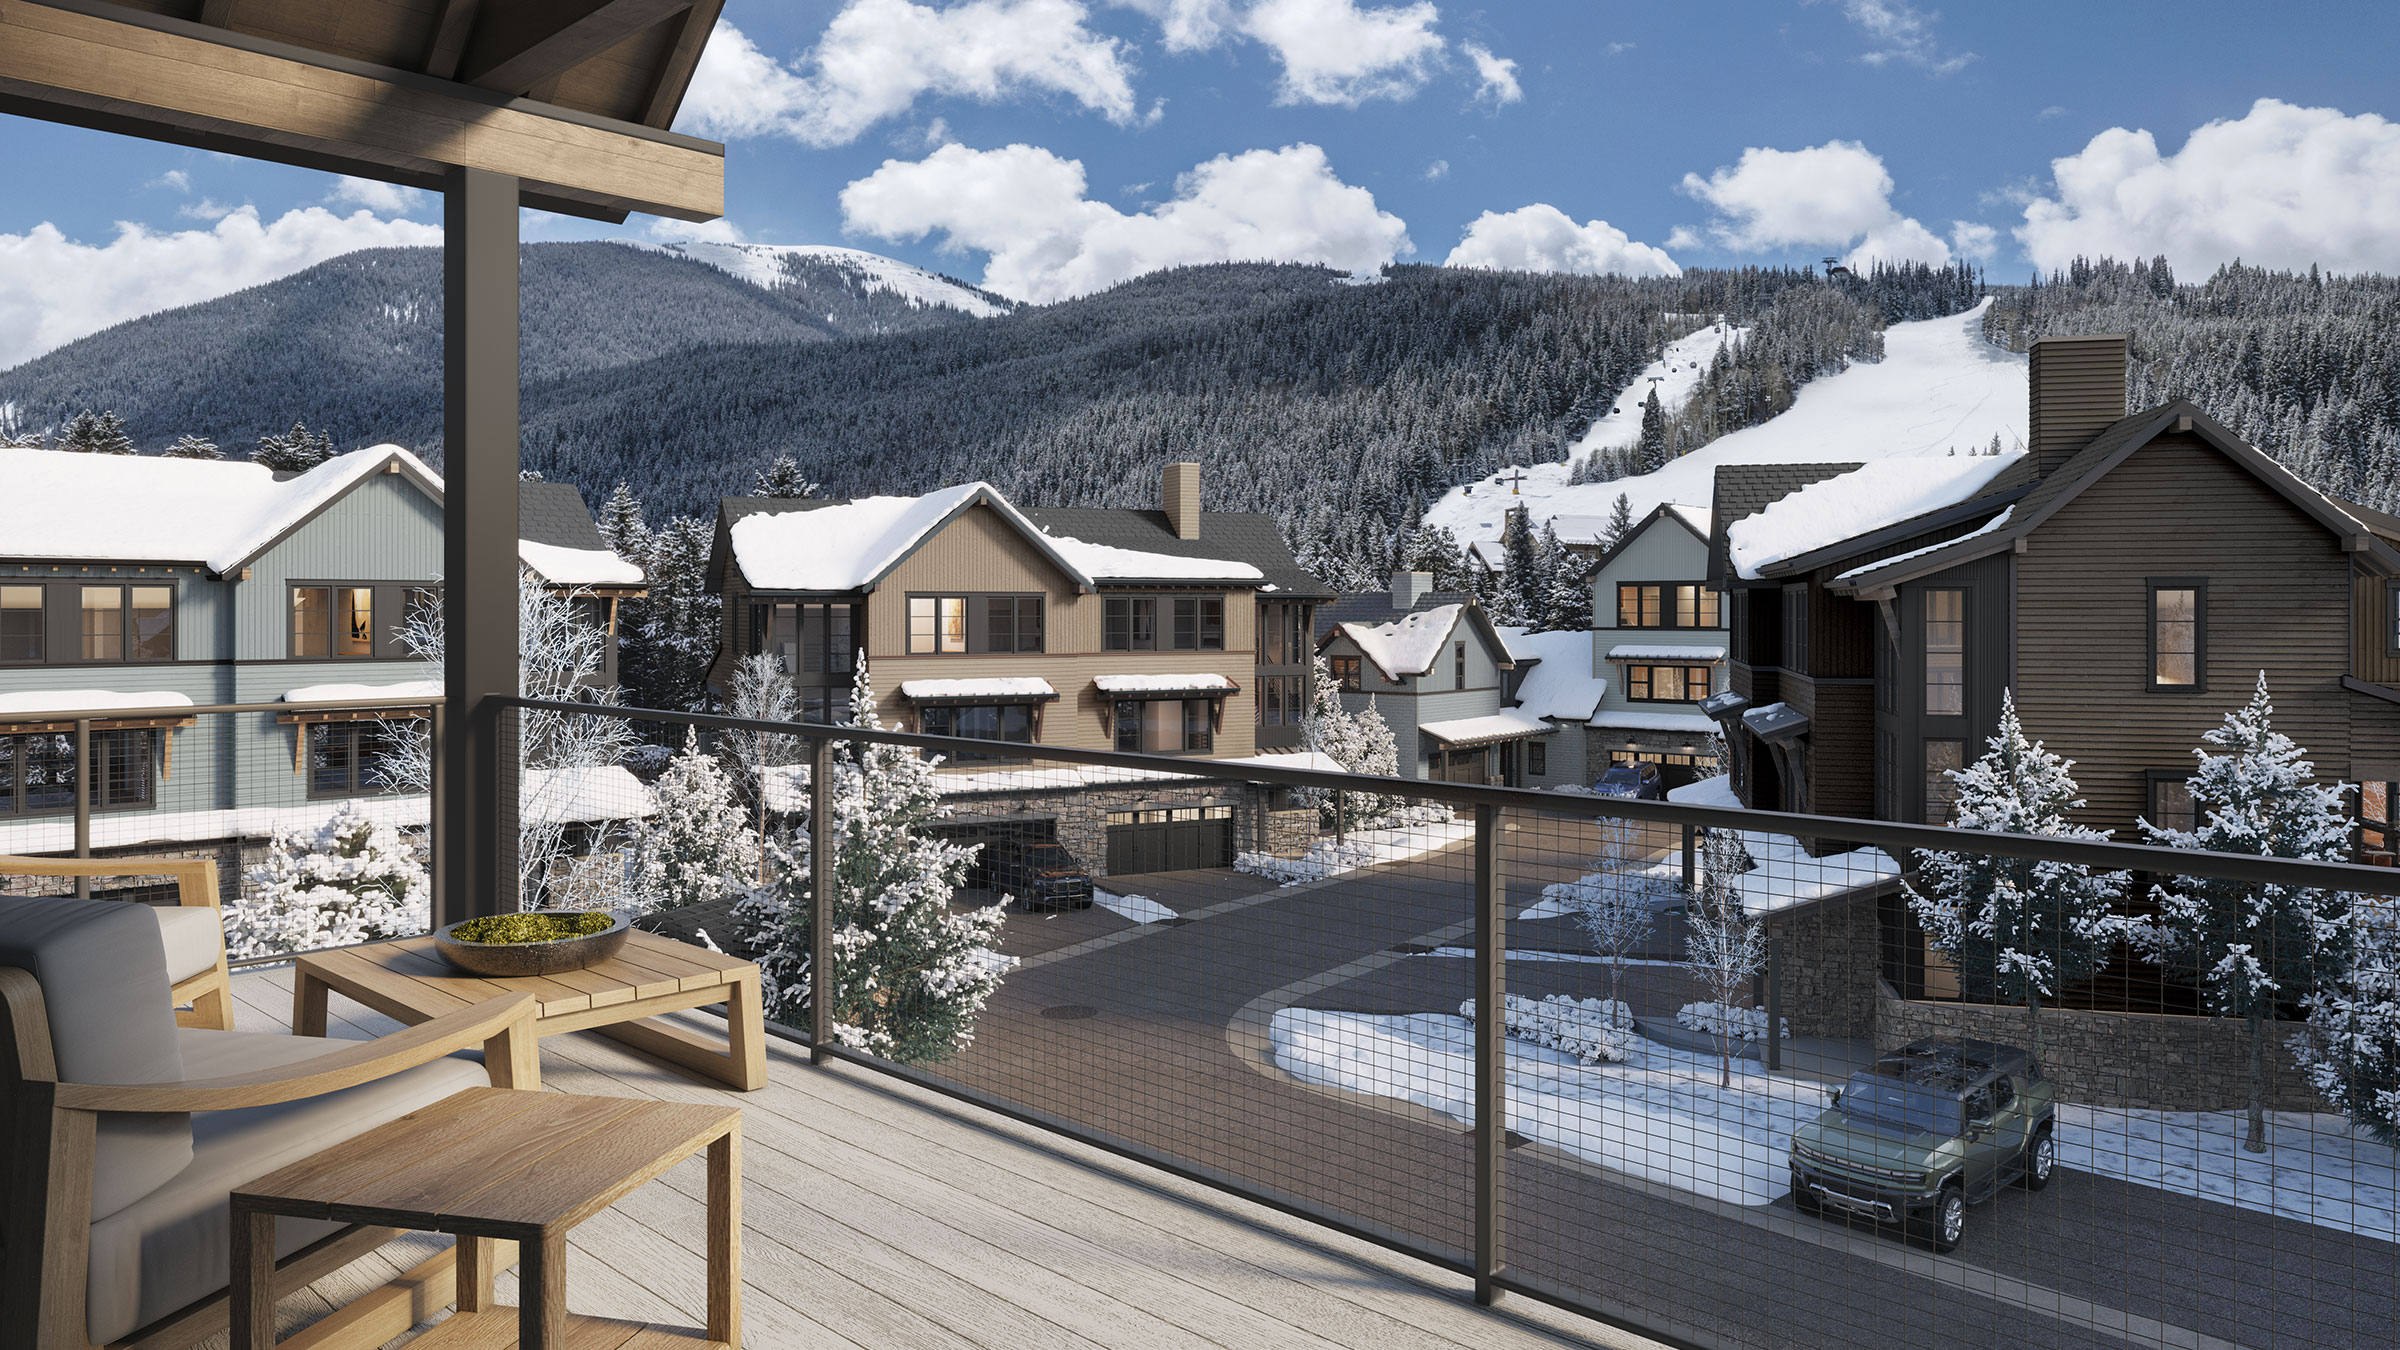 Alcove is a peaceful retreat just moments from ski lifts and the village center.